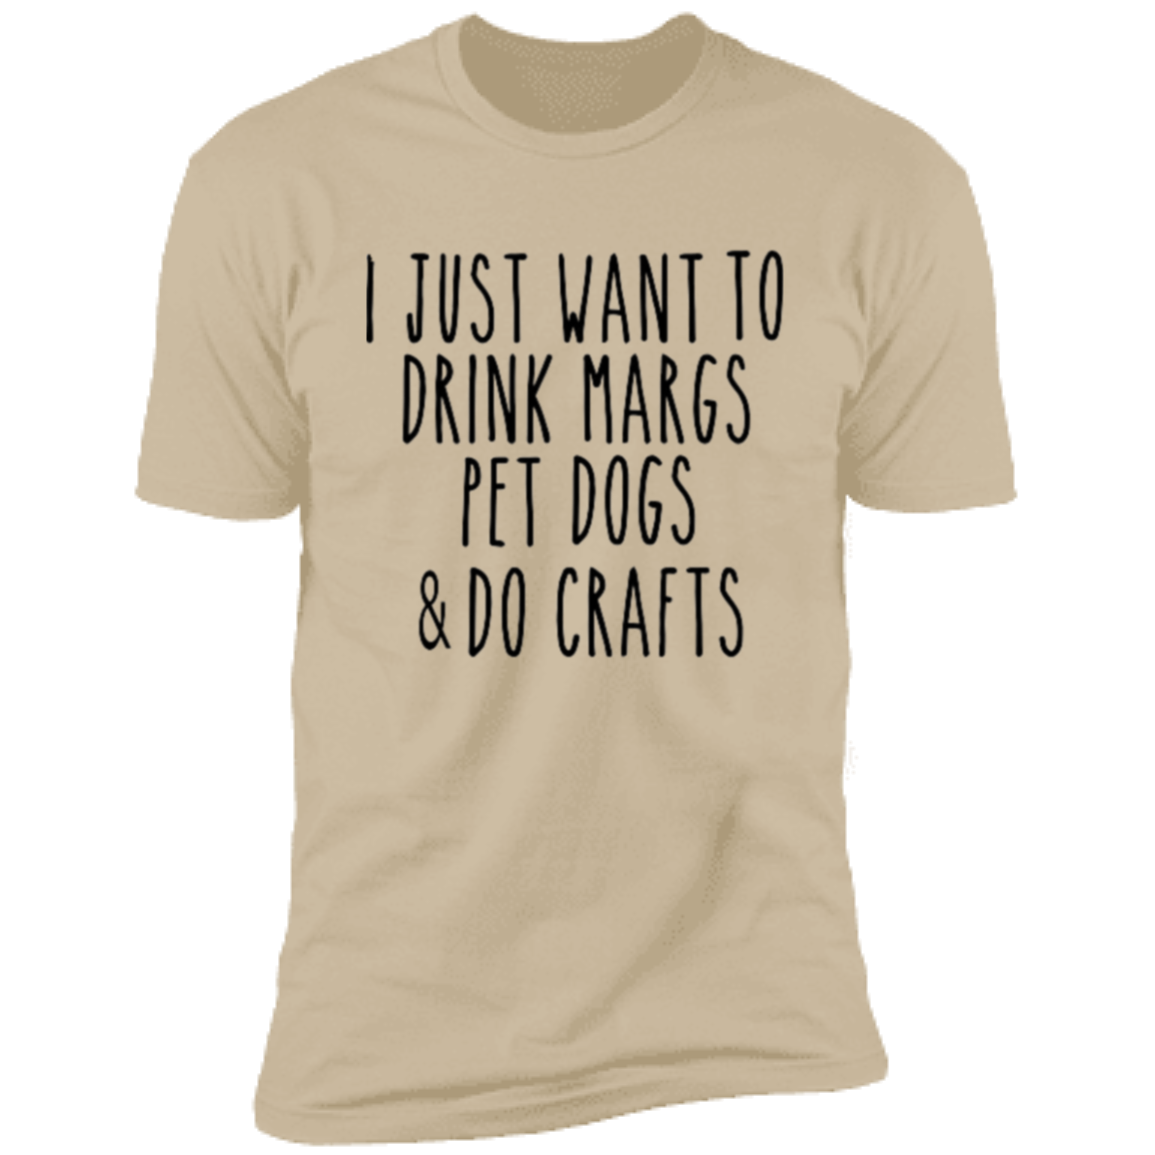 I just want to drink Margs  T-Shirt